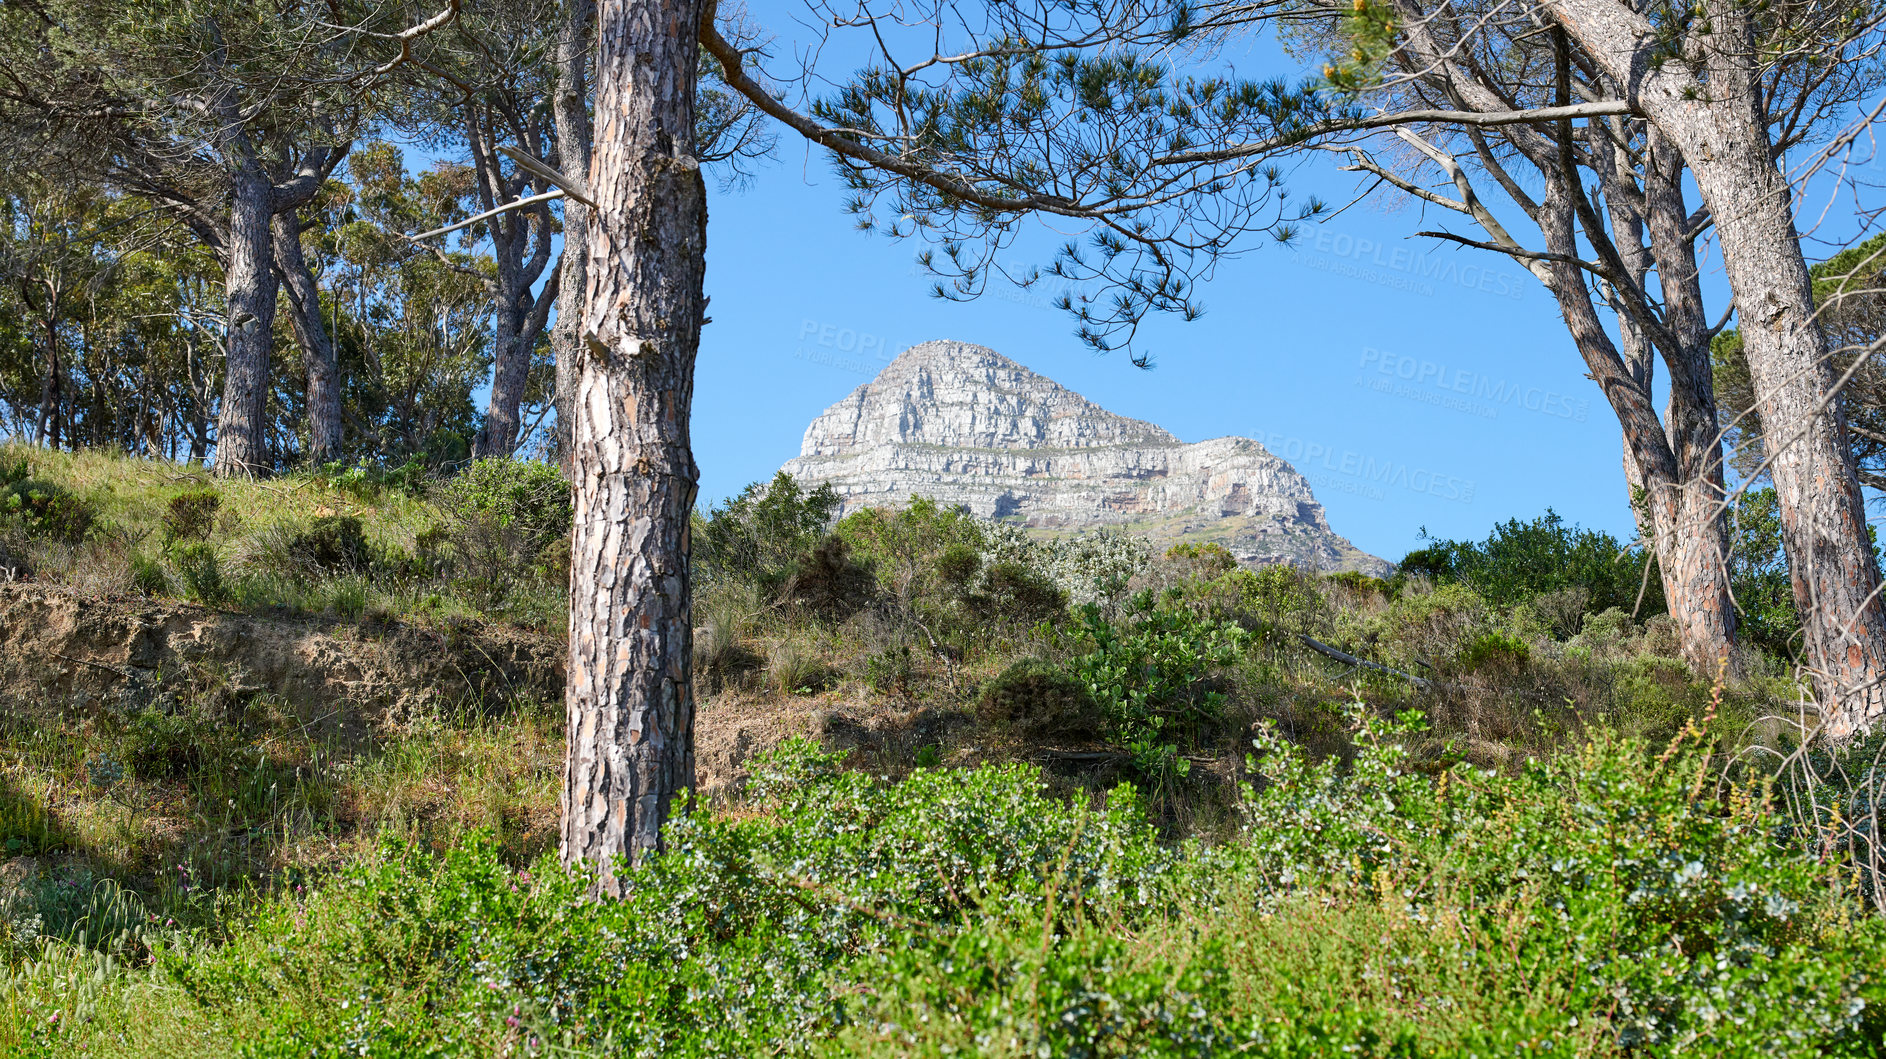 Buy stock photo Lush green pine trees and shrubs growing in a wild, remote forest near Lions Head mountain in Cape Town, South Africa. Flora and plants in a peaceful, calm and uncultivated nature reserve in summer